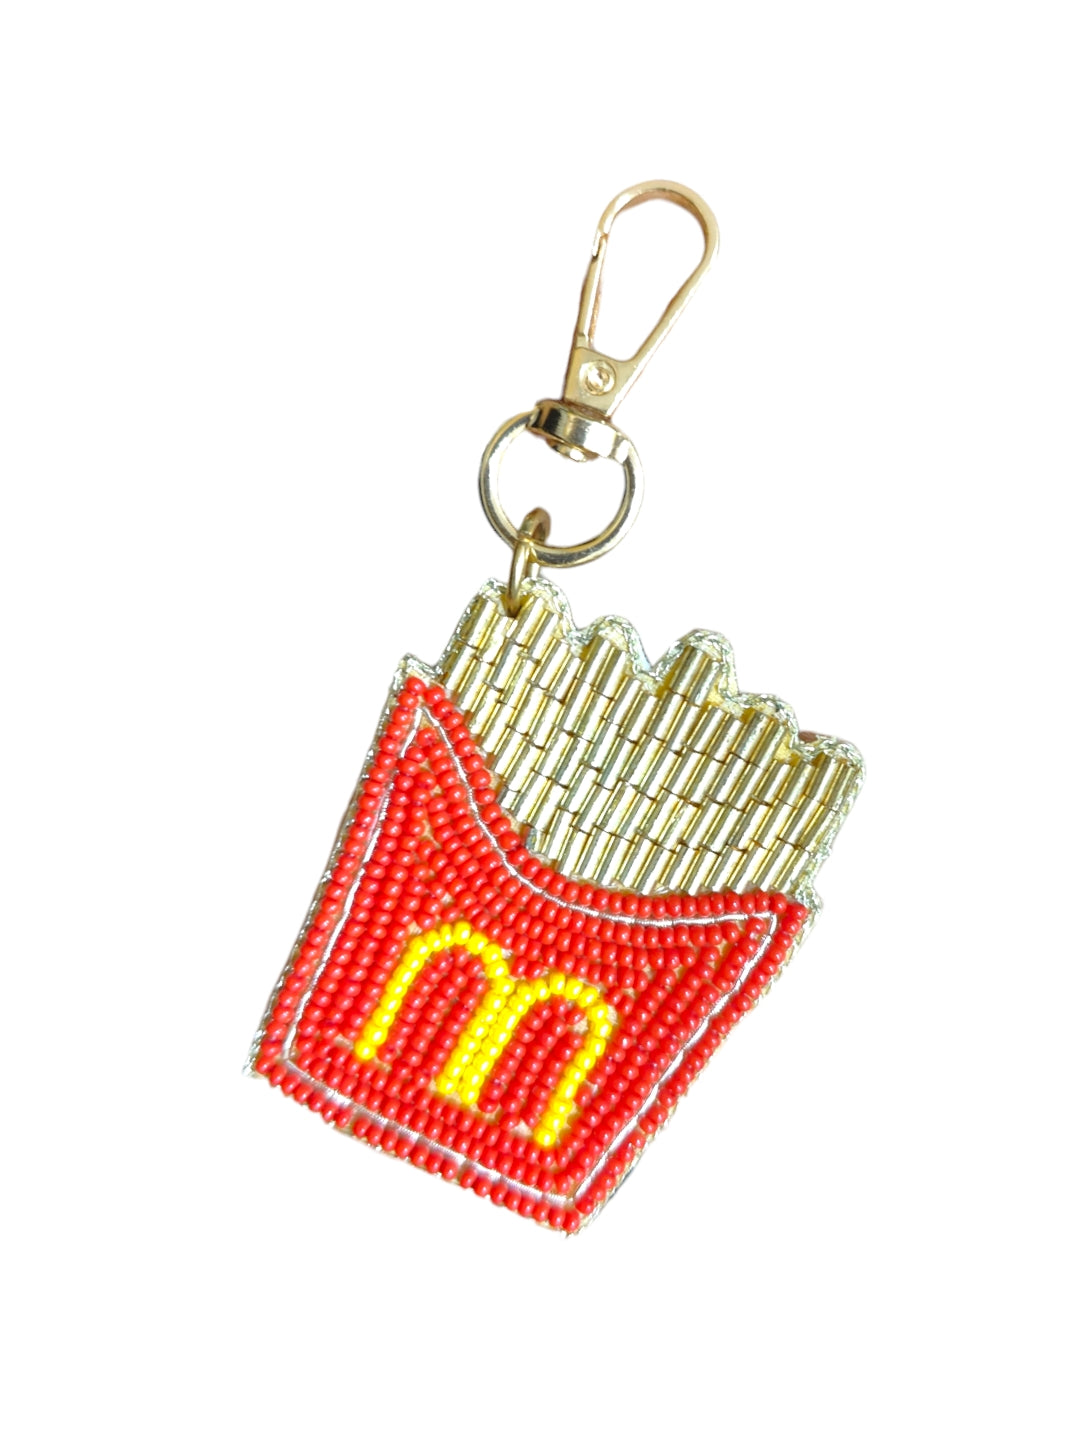 Made from high-quality materials, this adorable charm captures the iconic look of MCDonald's fries, complete with the signature red and yellow packaging.